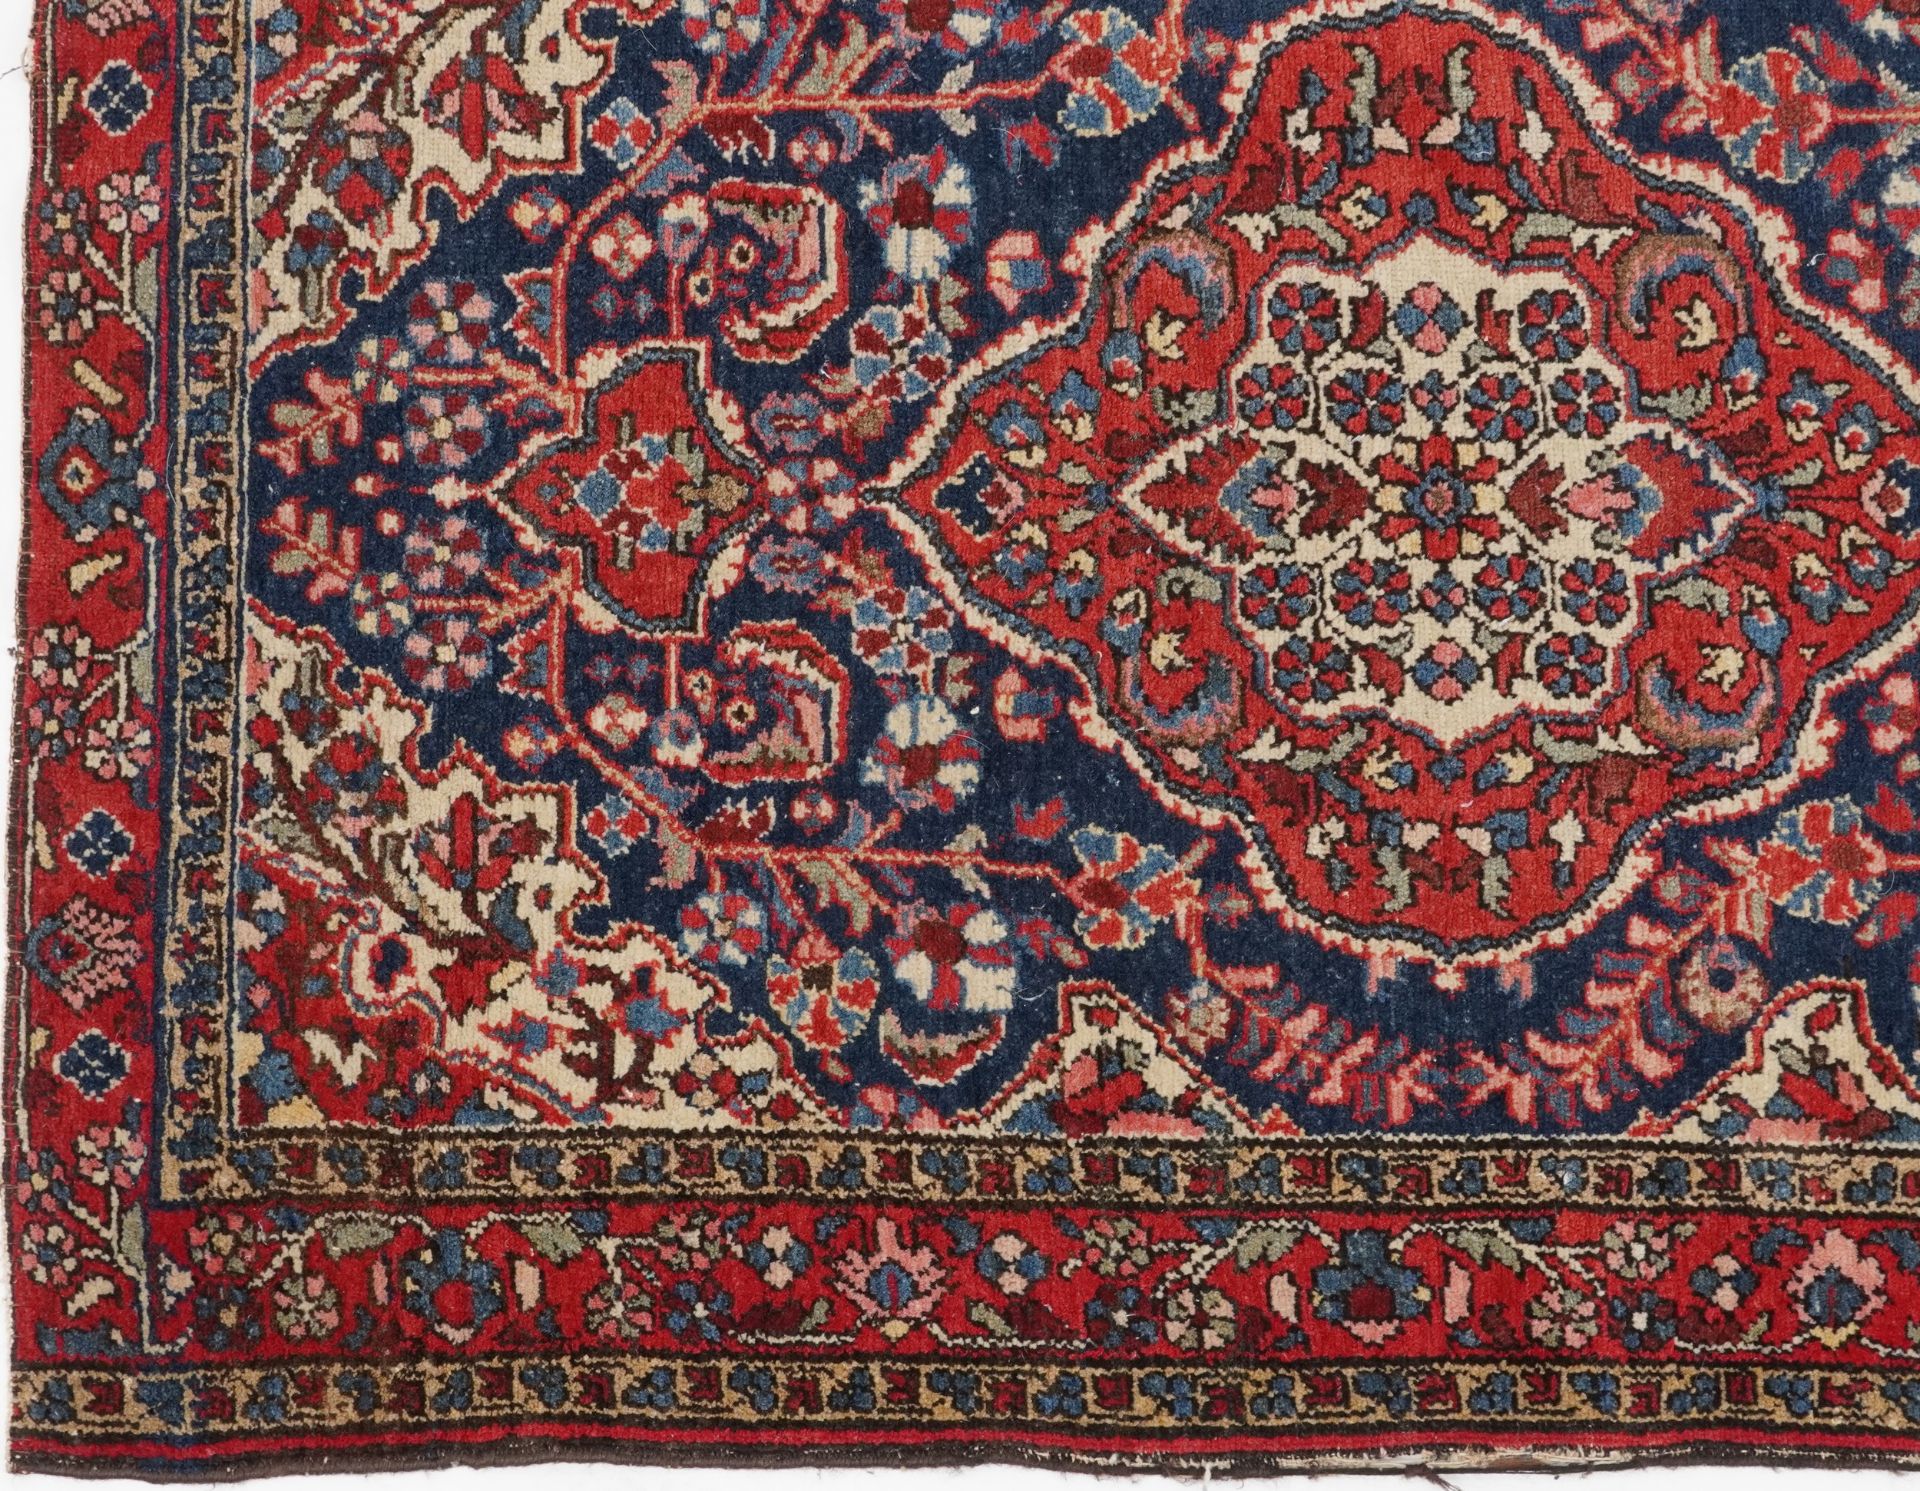 Rectangular Persian blue and red ground rug having and allover floral design, 146cm x 103cm : For - Image 4 of 5